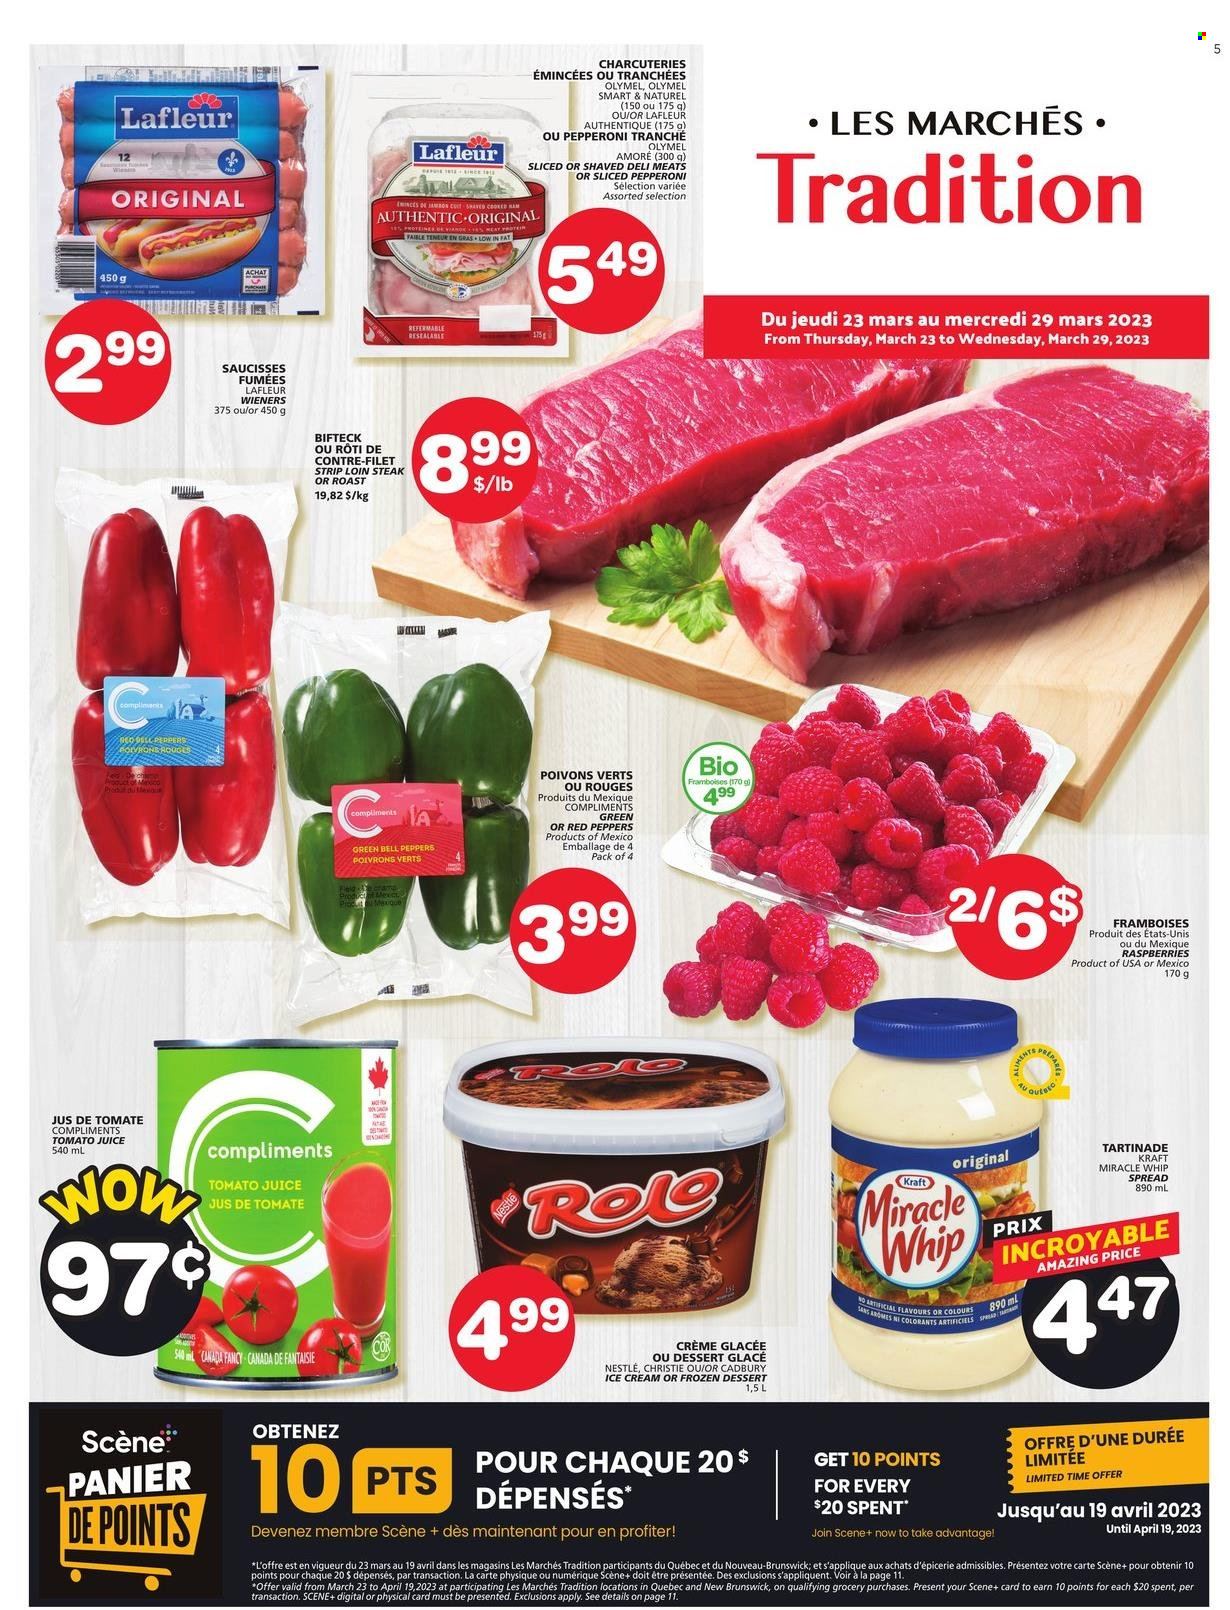 thumbnail - Les Marchés Tradition Flyer - March 23, 2023 - March 29, 2023 - Sales products - bell peppers, peppers, red peppers, Kraft®, roast, pepperoni, Miracle Whip, ice cream, Mars, Cadbury, tomato juice, juice, steak, Nestlé. Page 1.